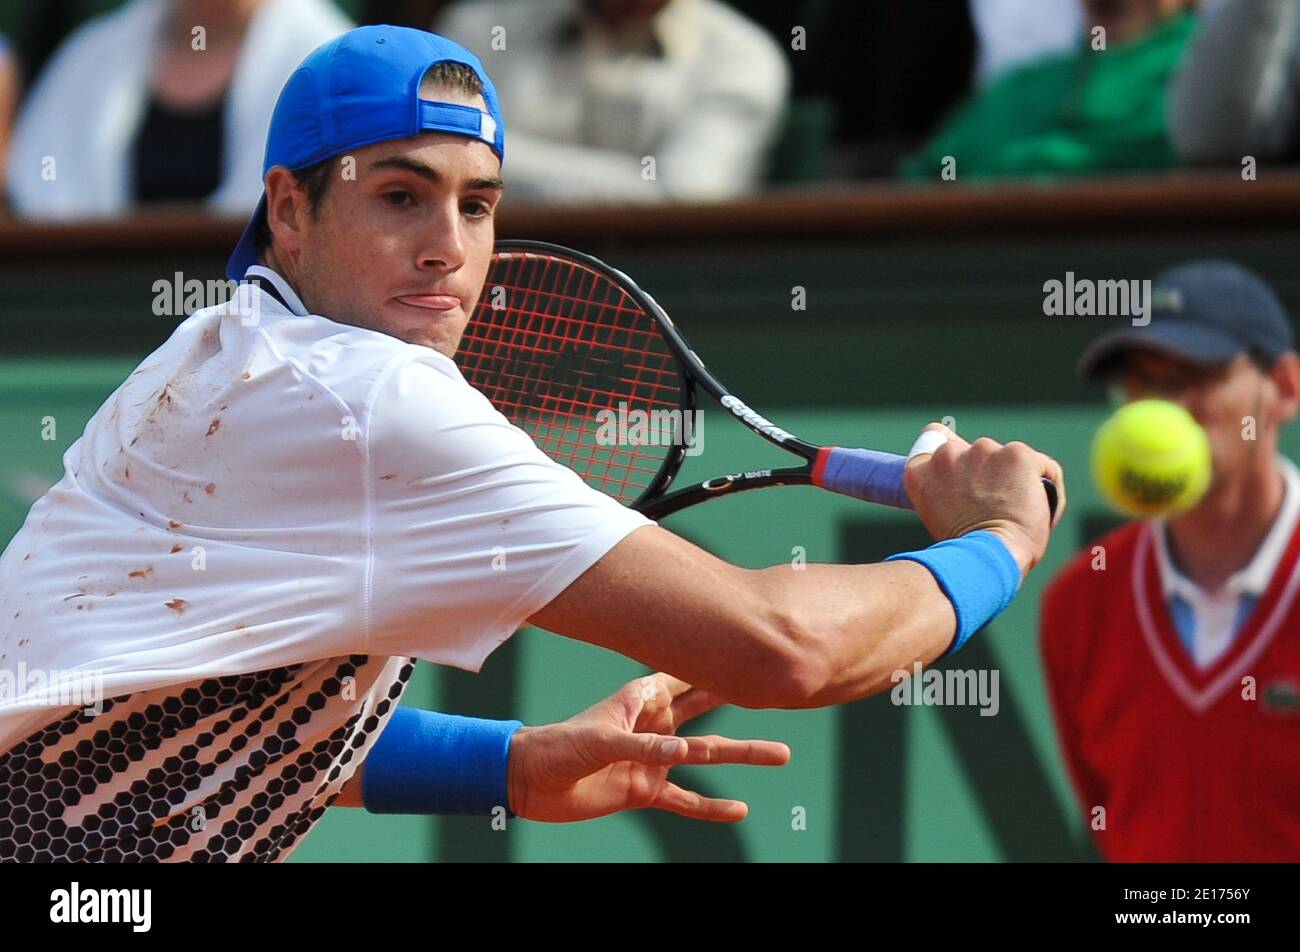 USA's John Isner is defeated by Spain's Rafael Nadal, 6-4, 6-7, 6-7, 6-2,  6-4, in their First Round Men's singles, Day 3, at the 2011 French Open  tennis championship at Roland Garros